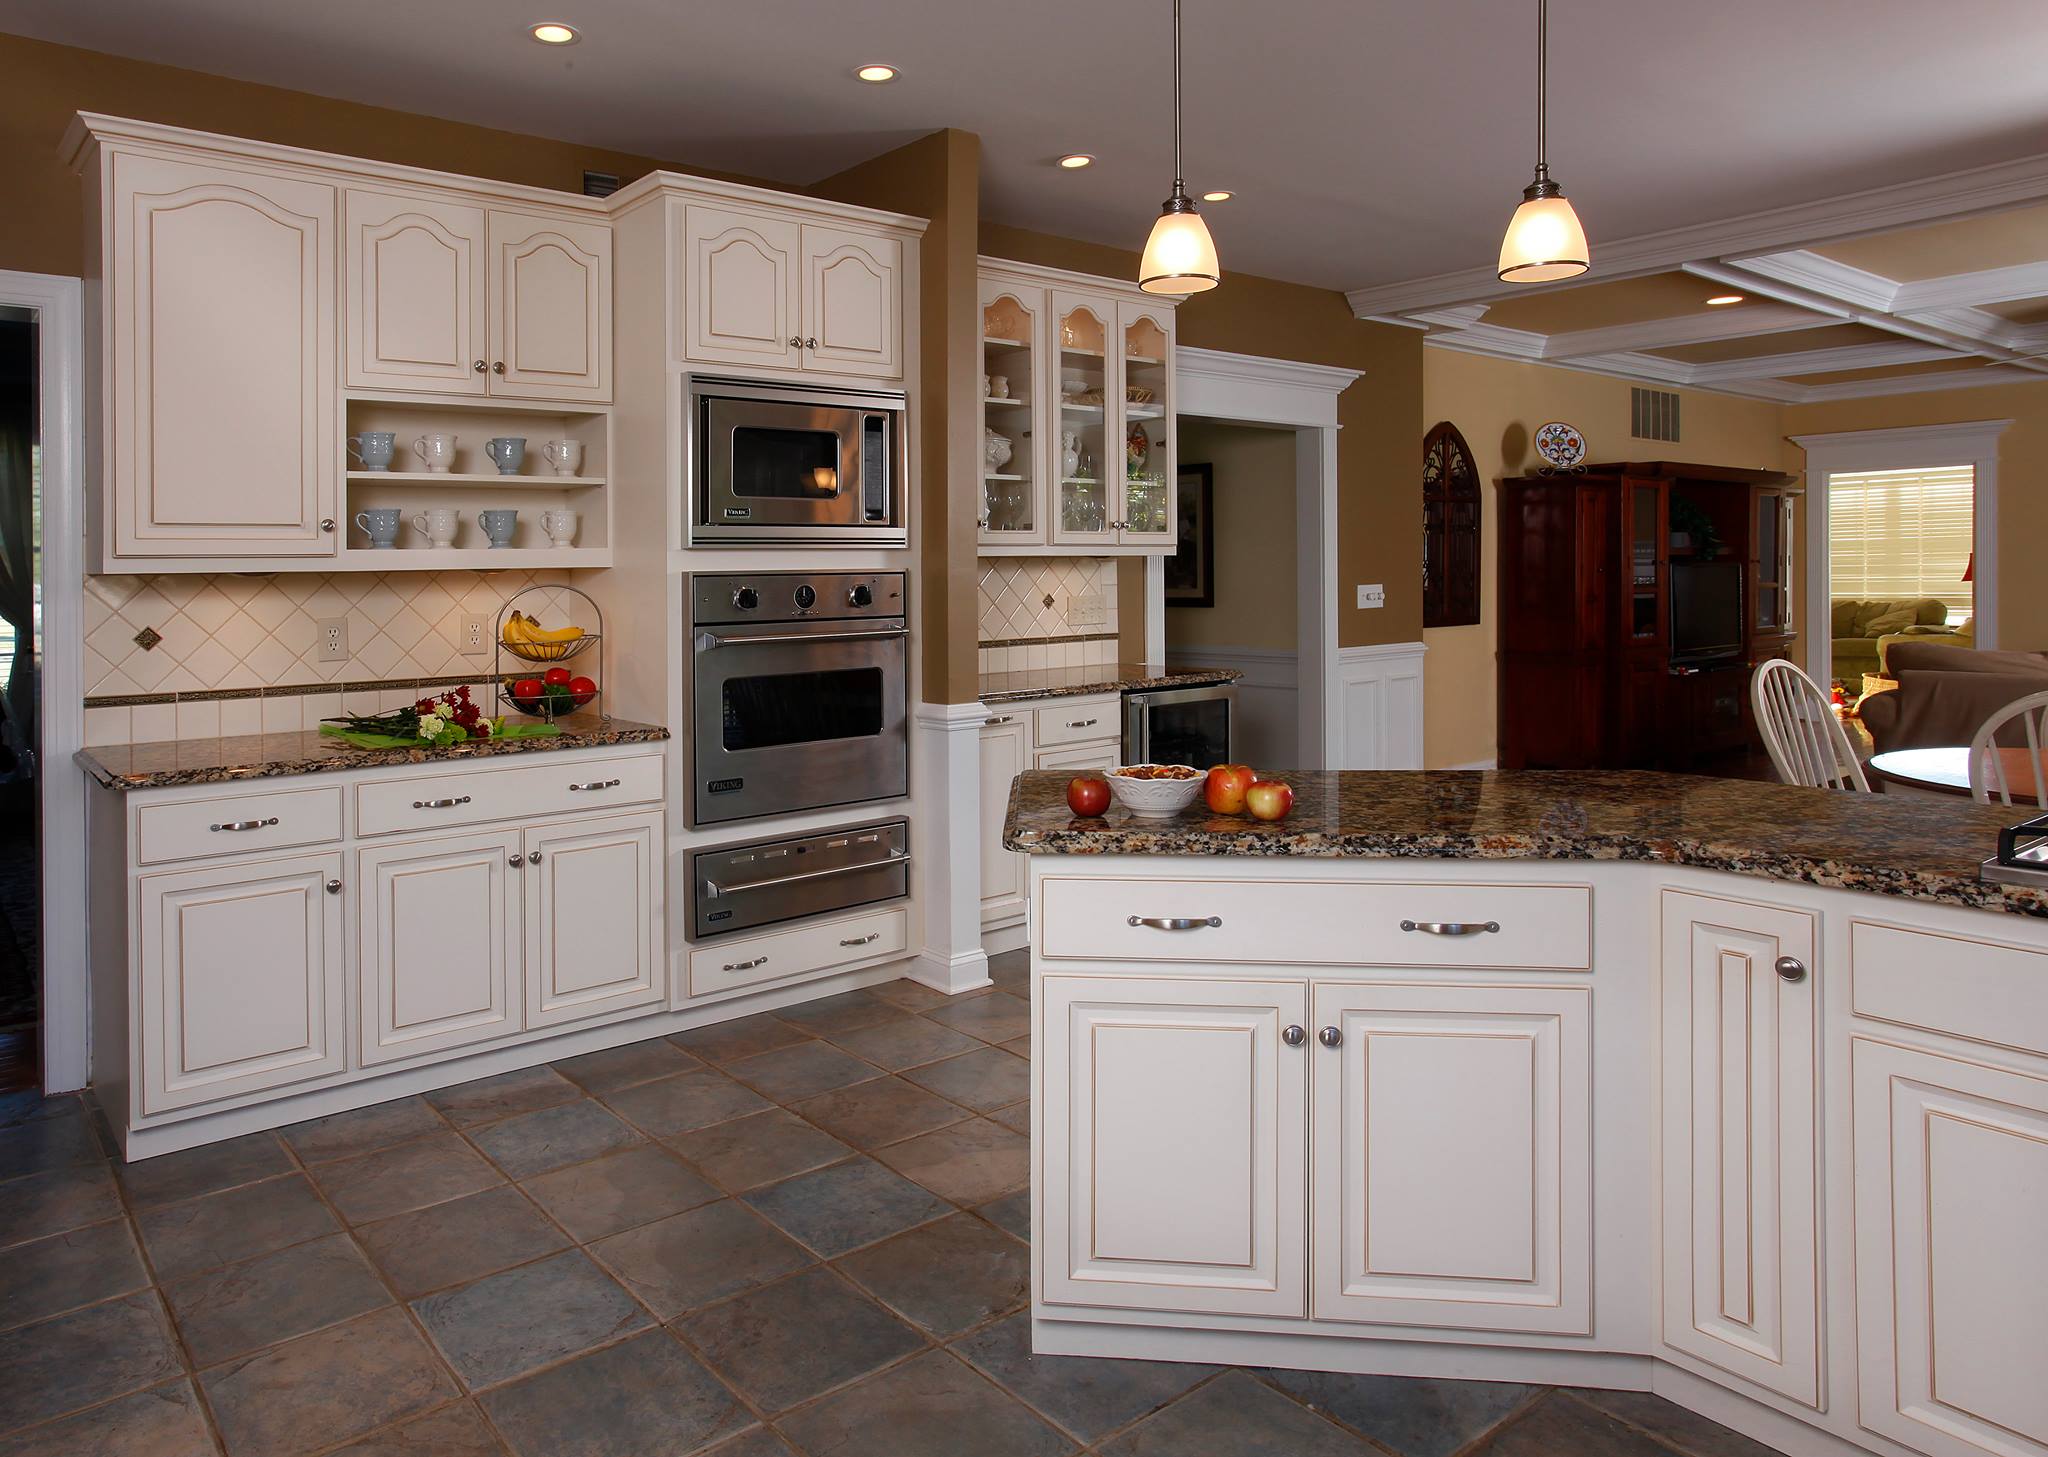 Why Winter White Cabinets are so Popular